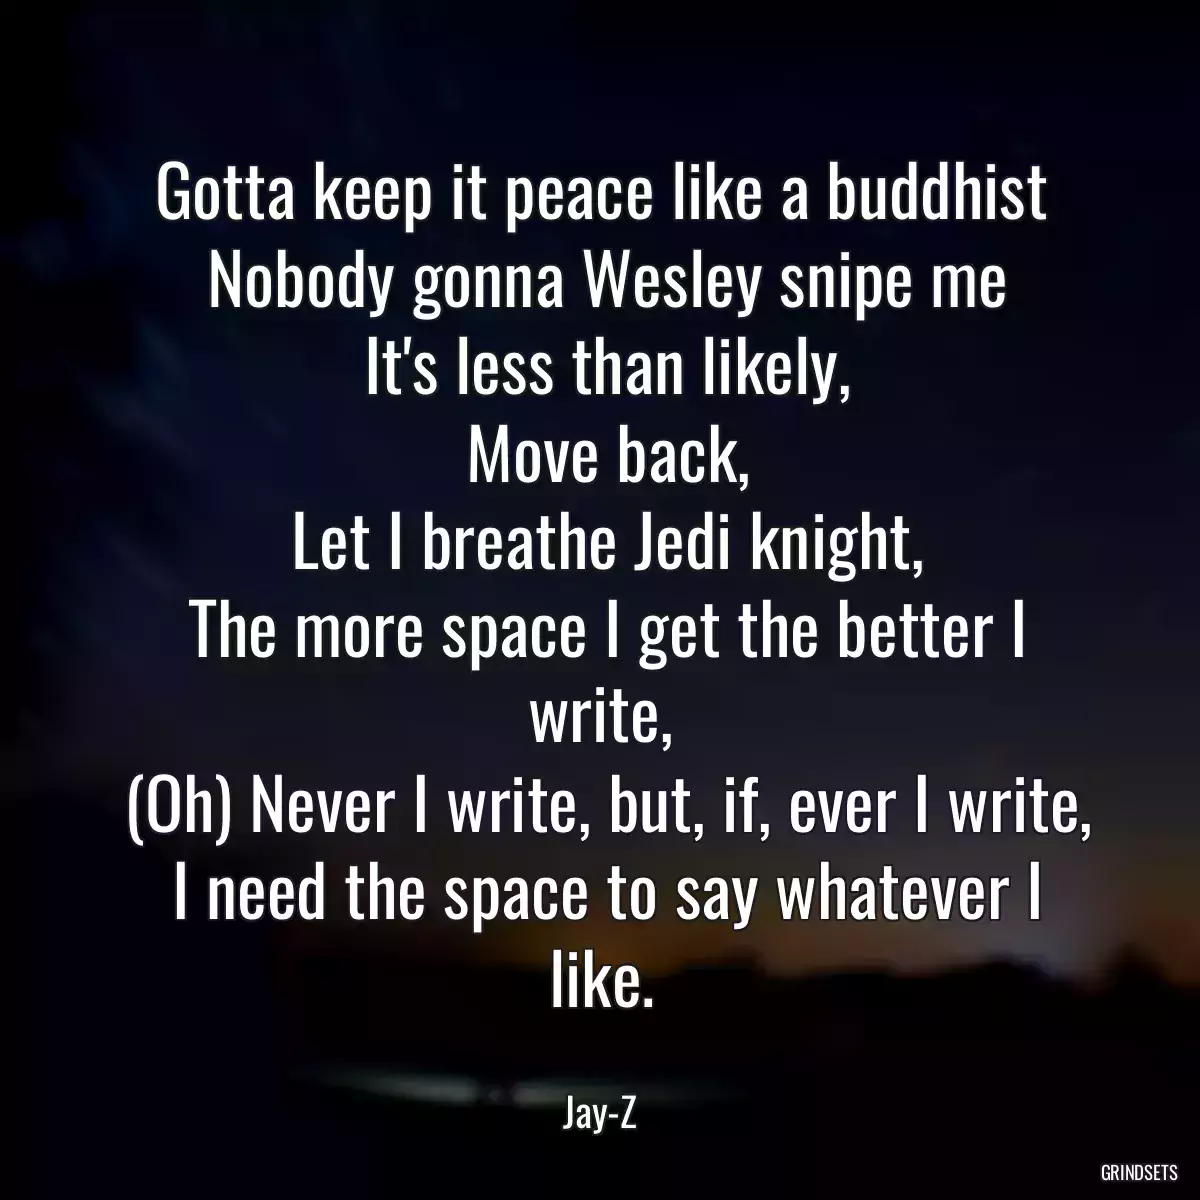 Gotta keep it peace like a buddhist
 Nobody gonna Wesley snipe me
 It\'s less than likely,
 Move back,
 Let I breathe Jedi knight,
 The more space I get the better I write,
 (Oh) Never I write, but, if, ever I write,
 I need the space to say whatever I like.